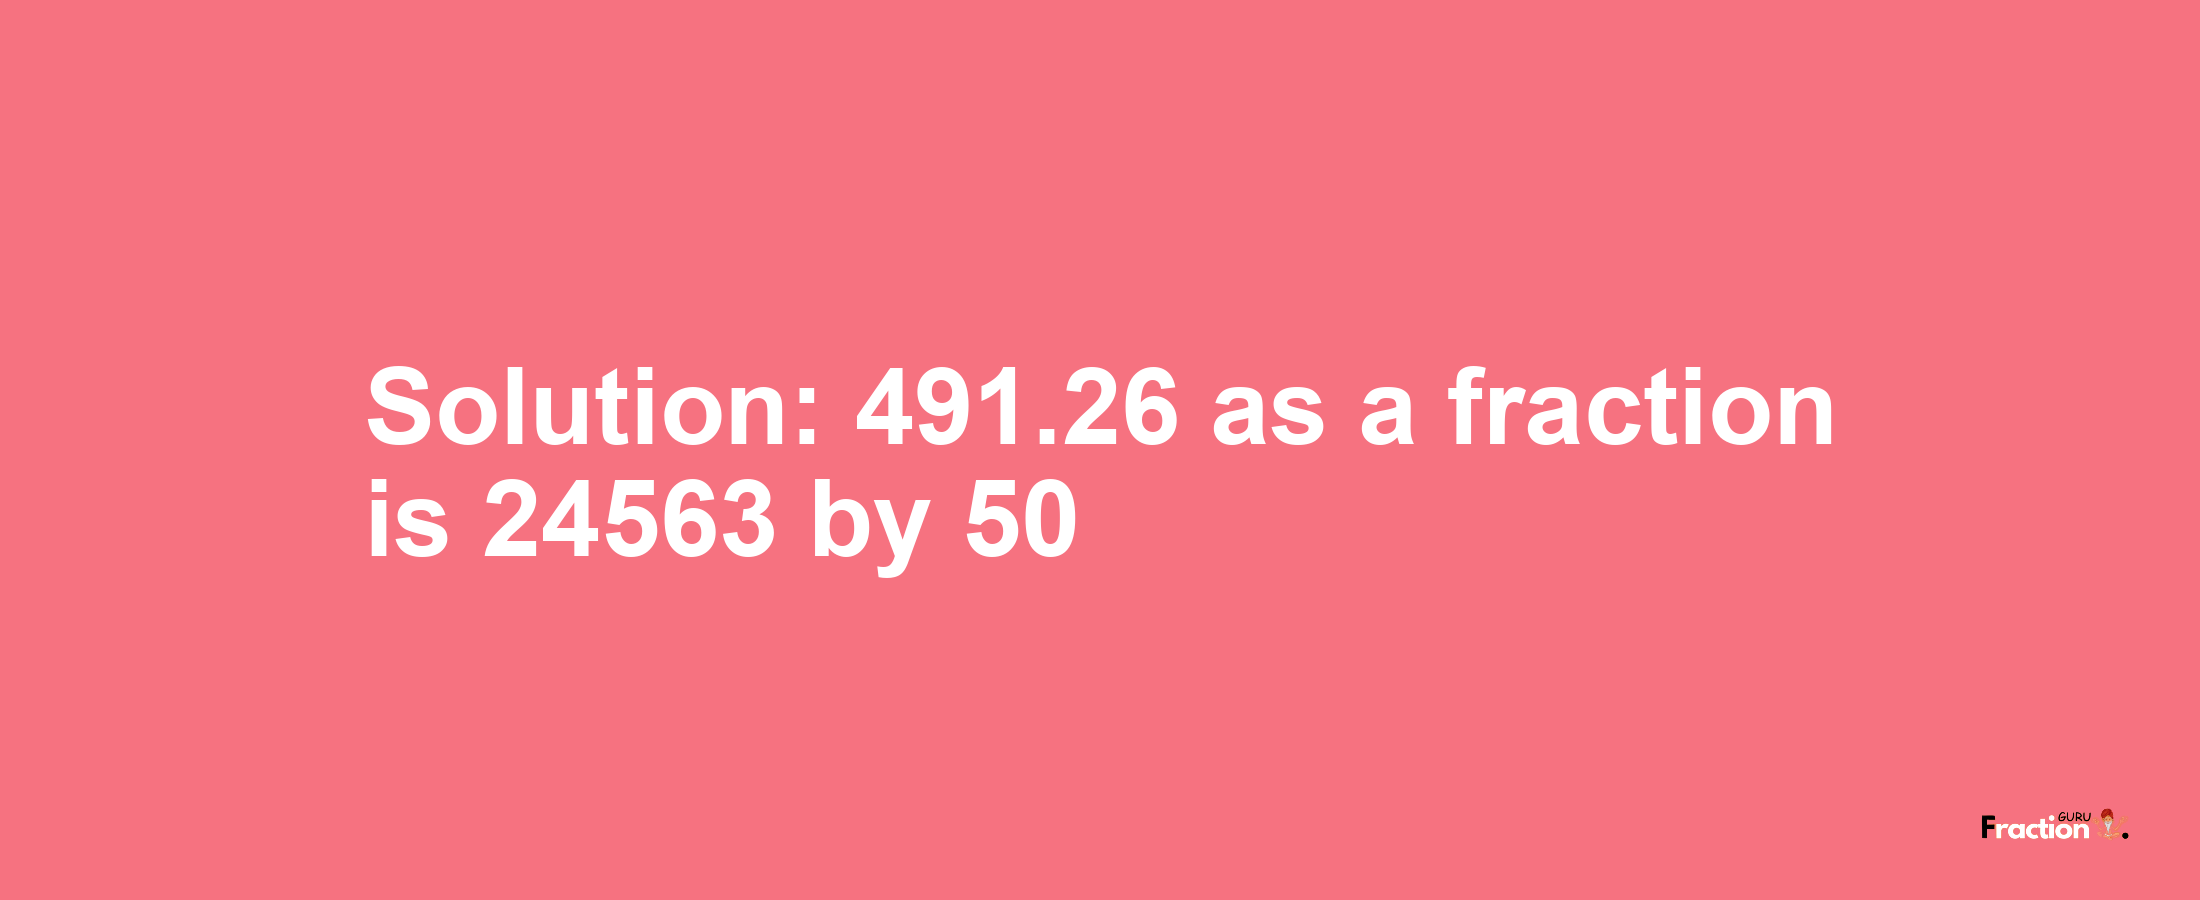 Solution:491.26 as a fraction is 24563/50